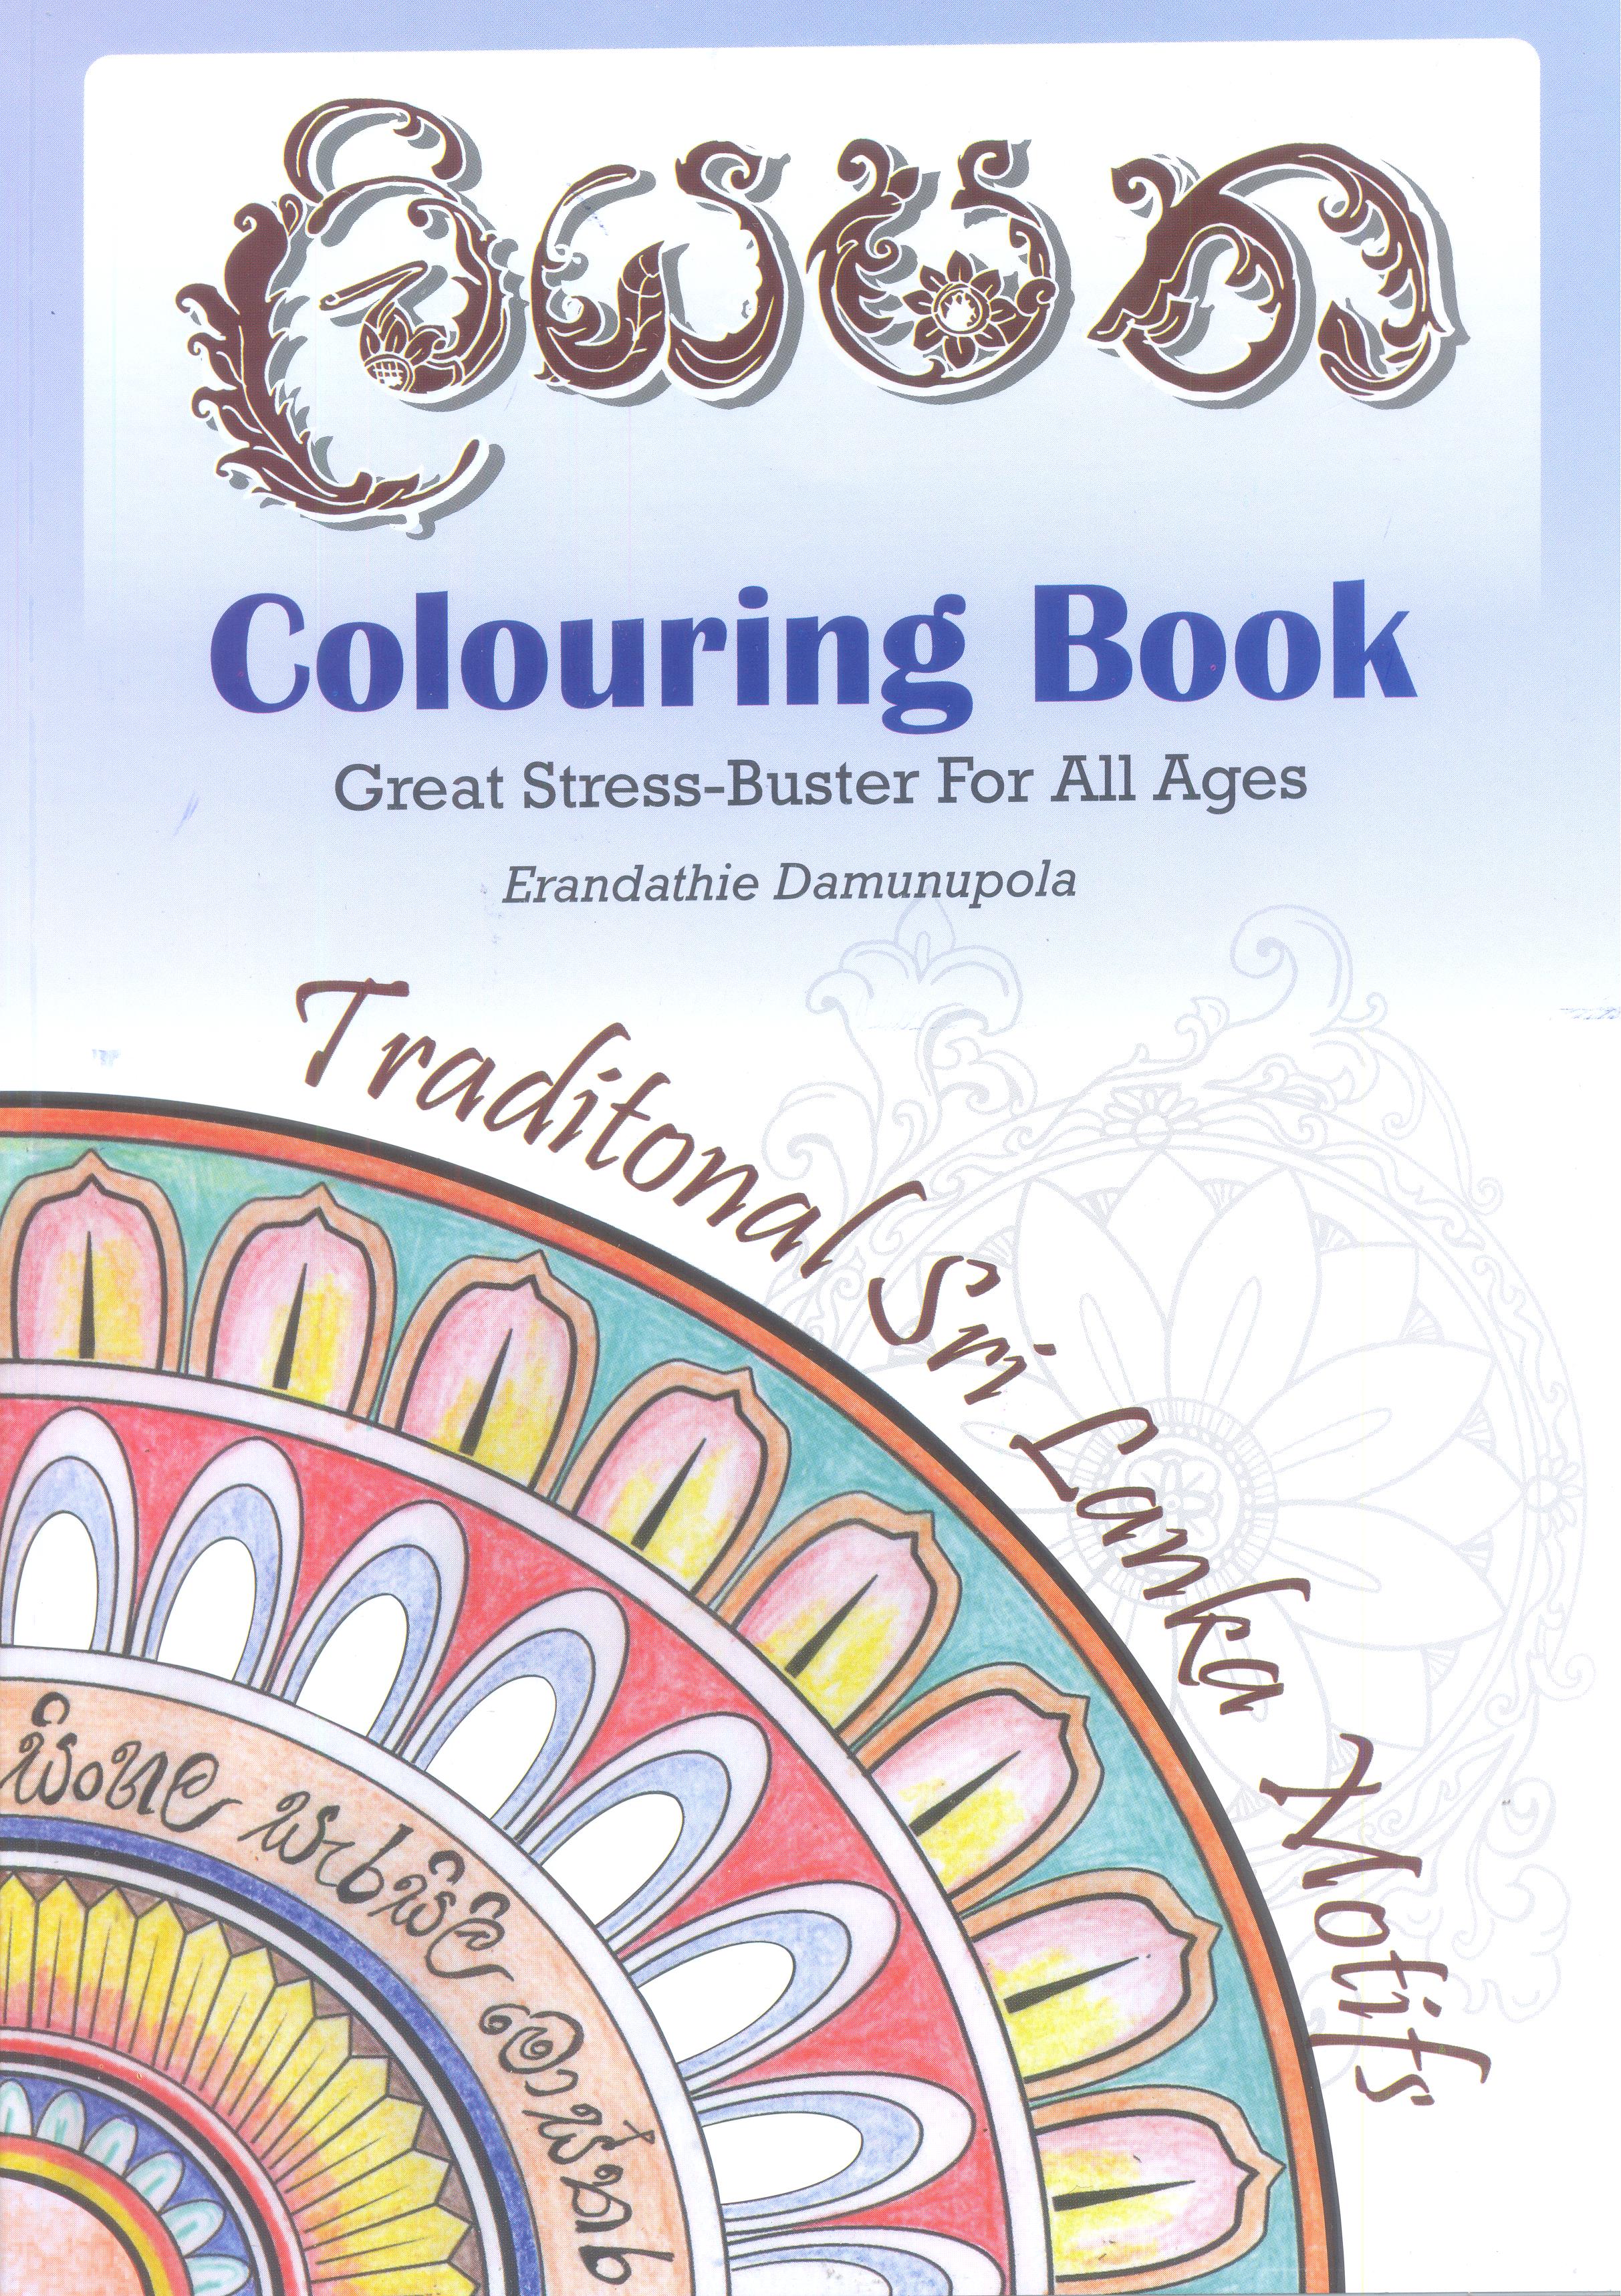 Liyapatha Colouring Book (Great Stress-Buster For All Ages )